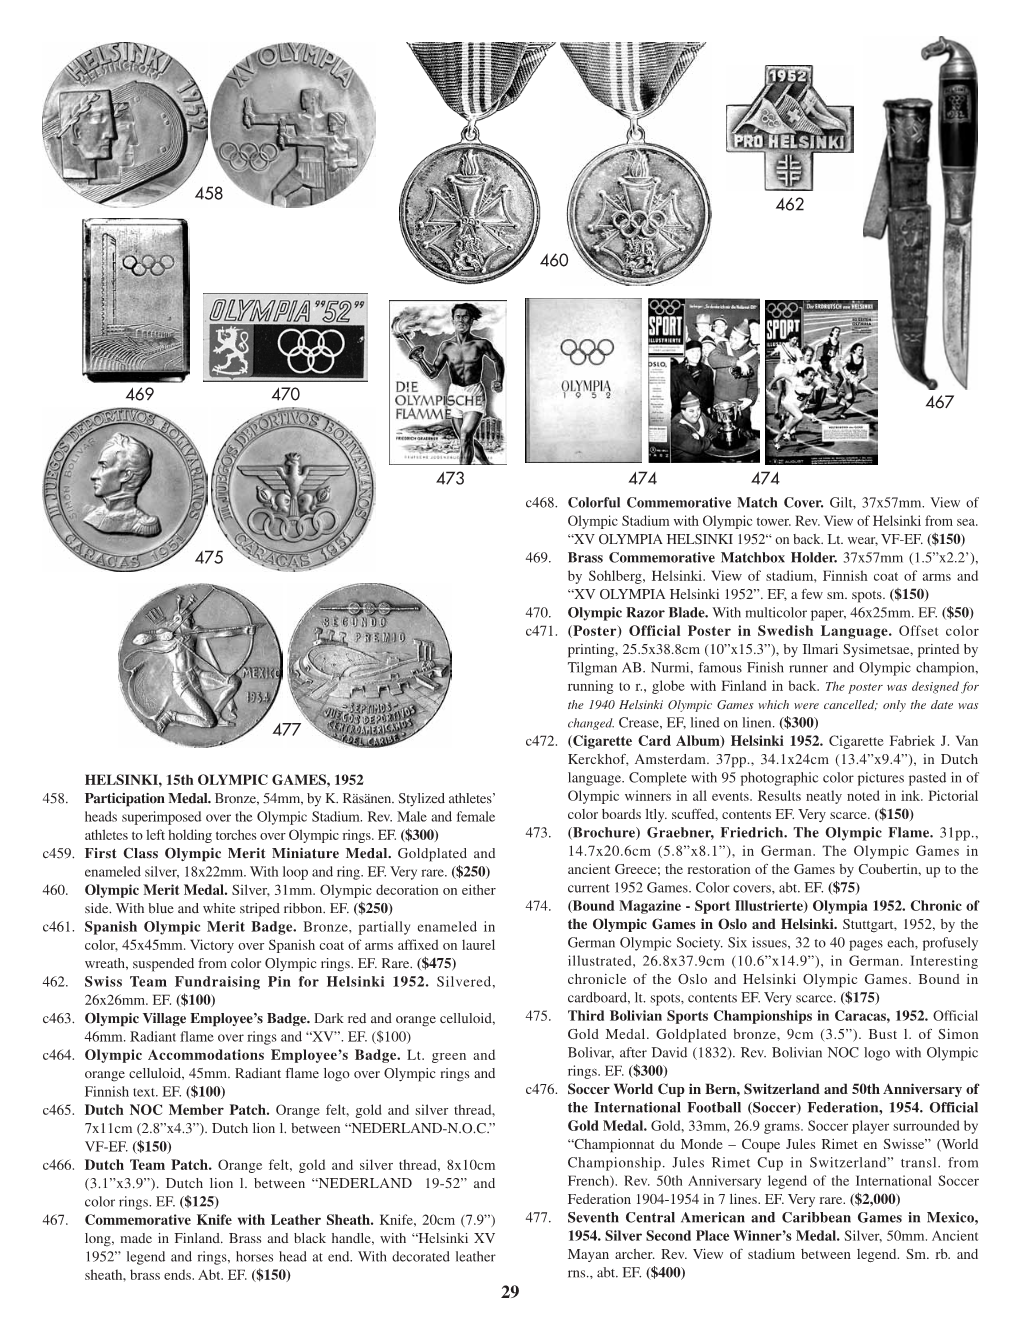 HELSINKI, 15Th OLYMPIC GAMES, 1952 458. Participation Medal